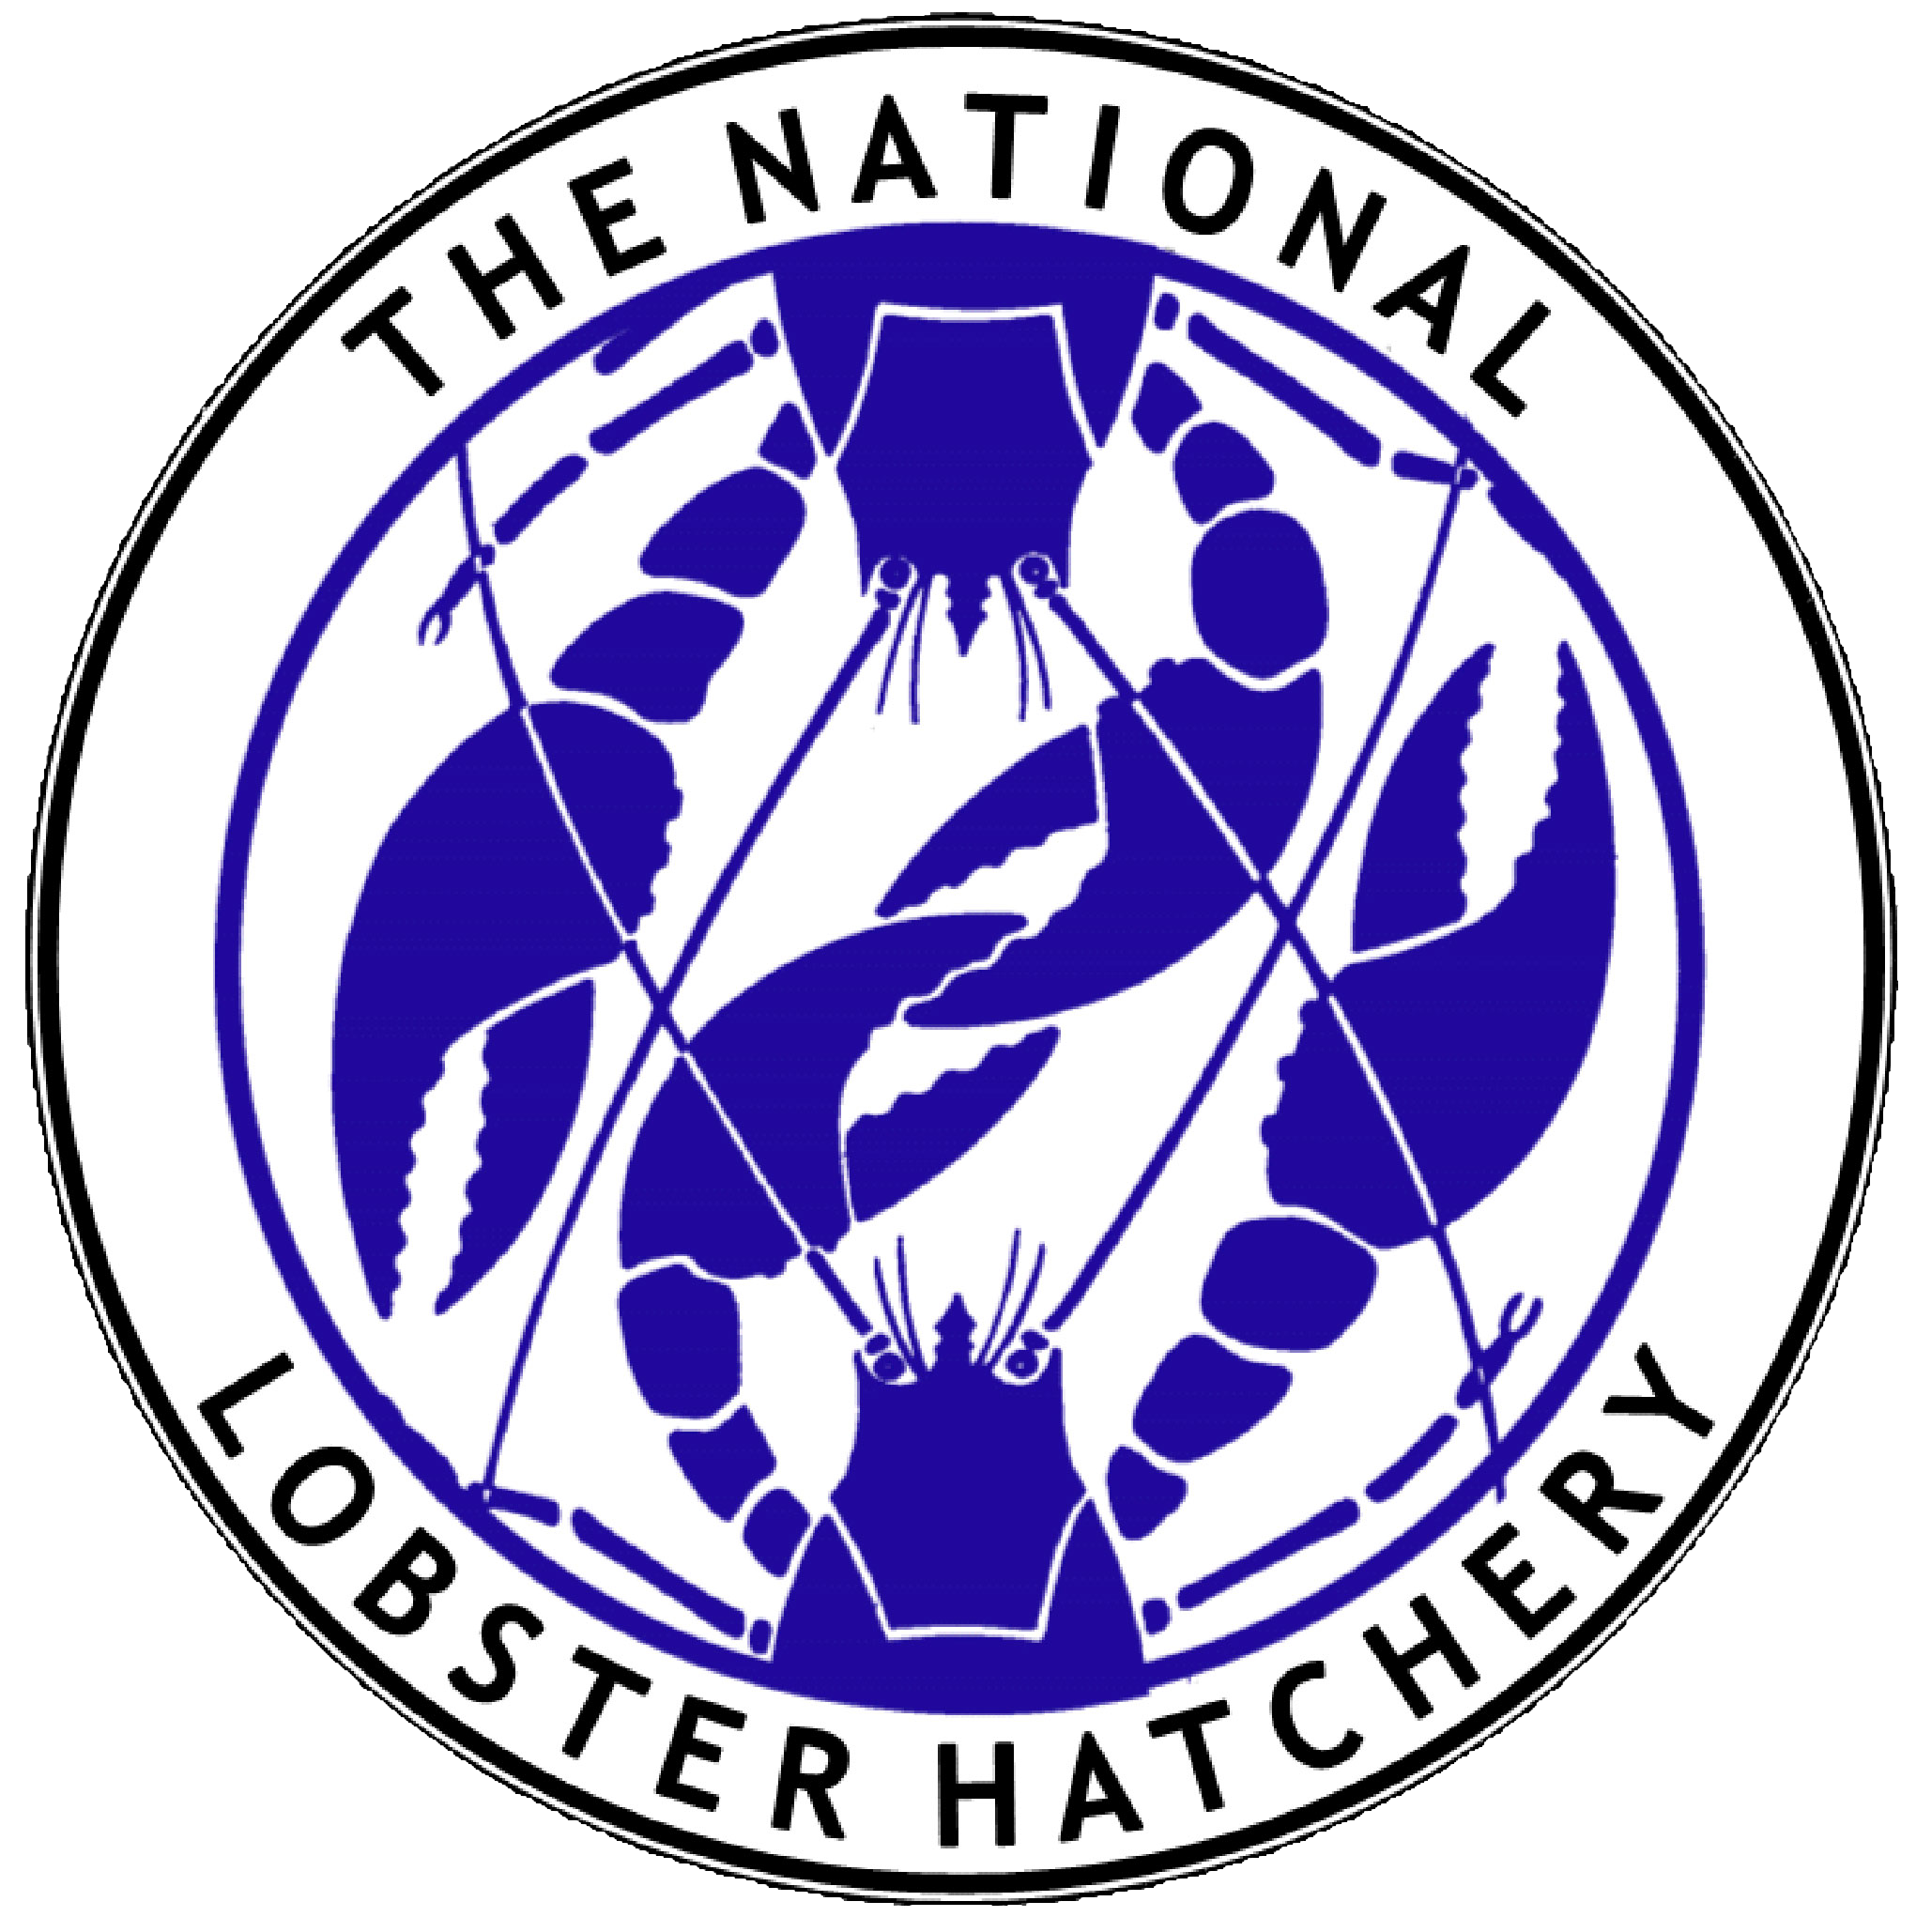 You are currently viewing National Lobster Hatchery, Improving sustainability in aquaculture